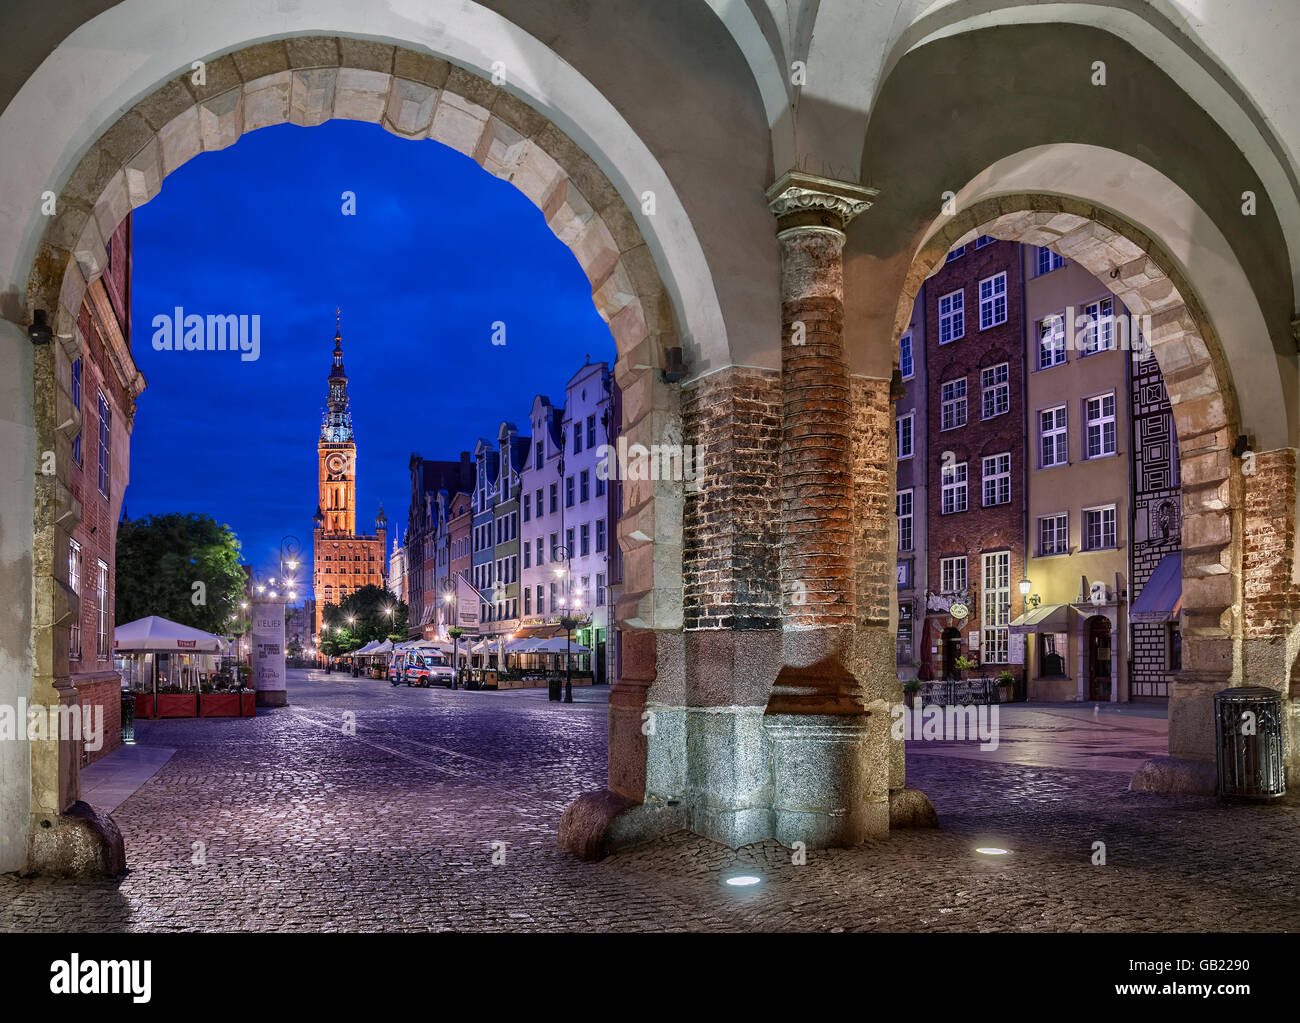 View through Green Gate or Brama Zielona towards the houses on Long Market or Długi Targ and the clock tower of Main Town Hall Stock Photo